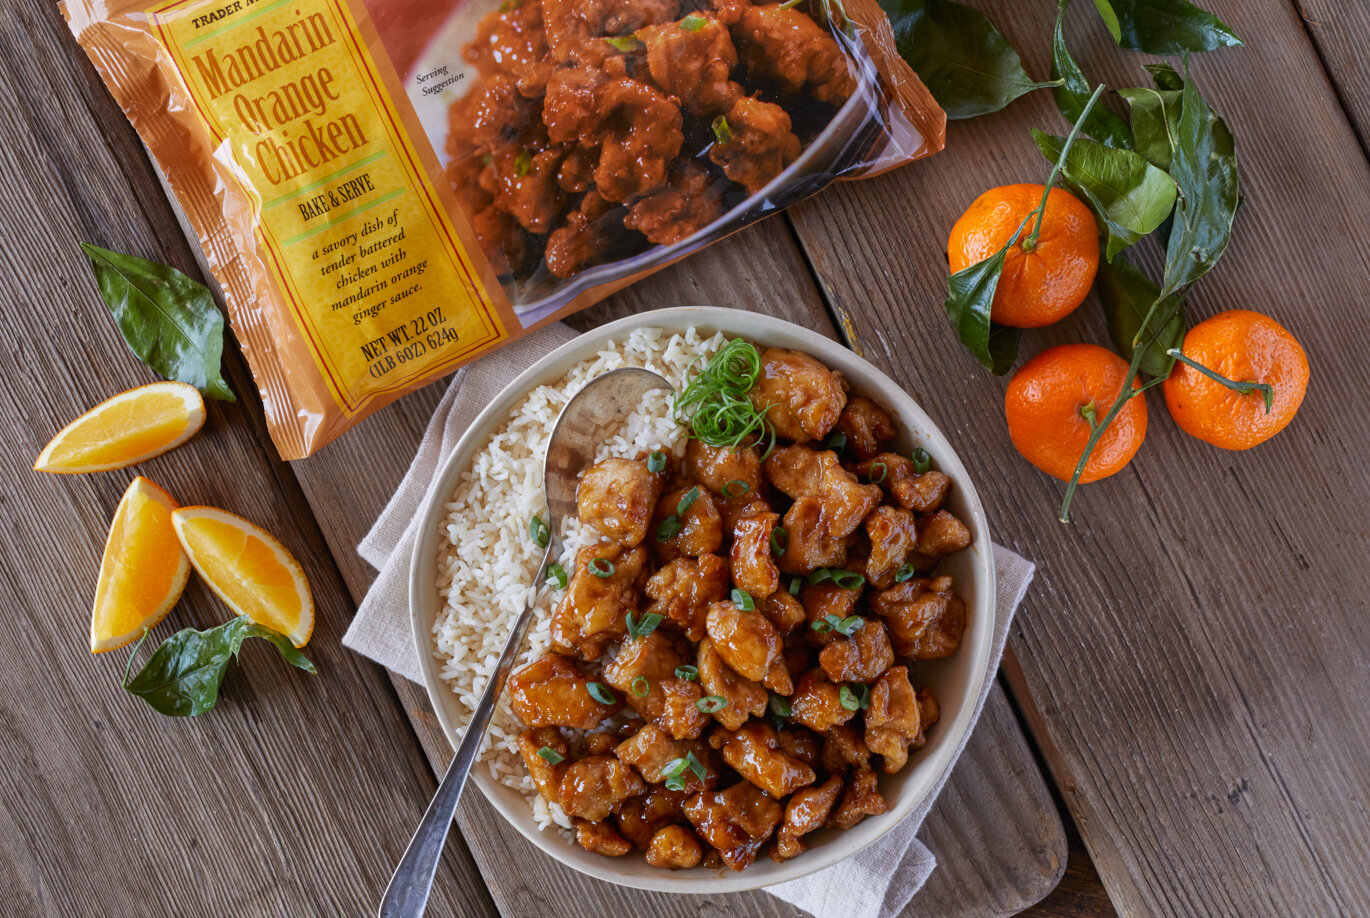 Weekly Menu Planning - Trader Joe's Mandarin Orange Chicken served in a bowl with brown rice and sliced green onions